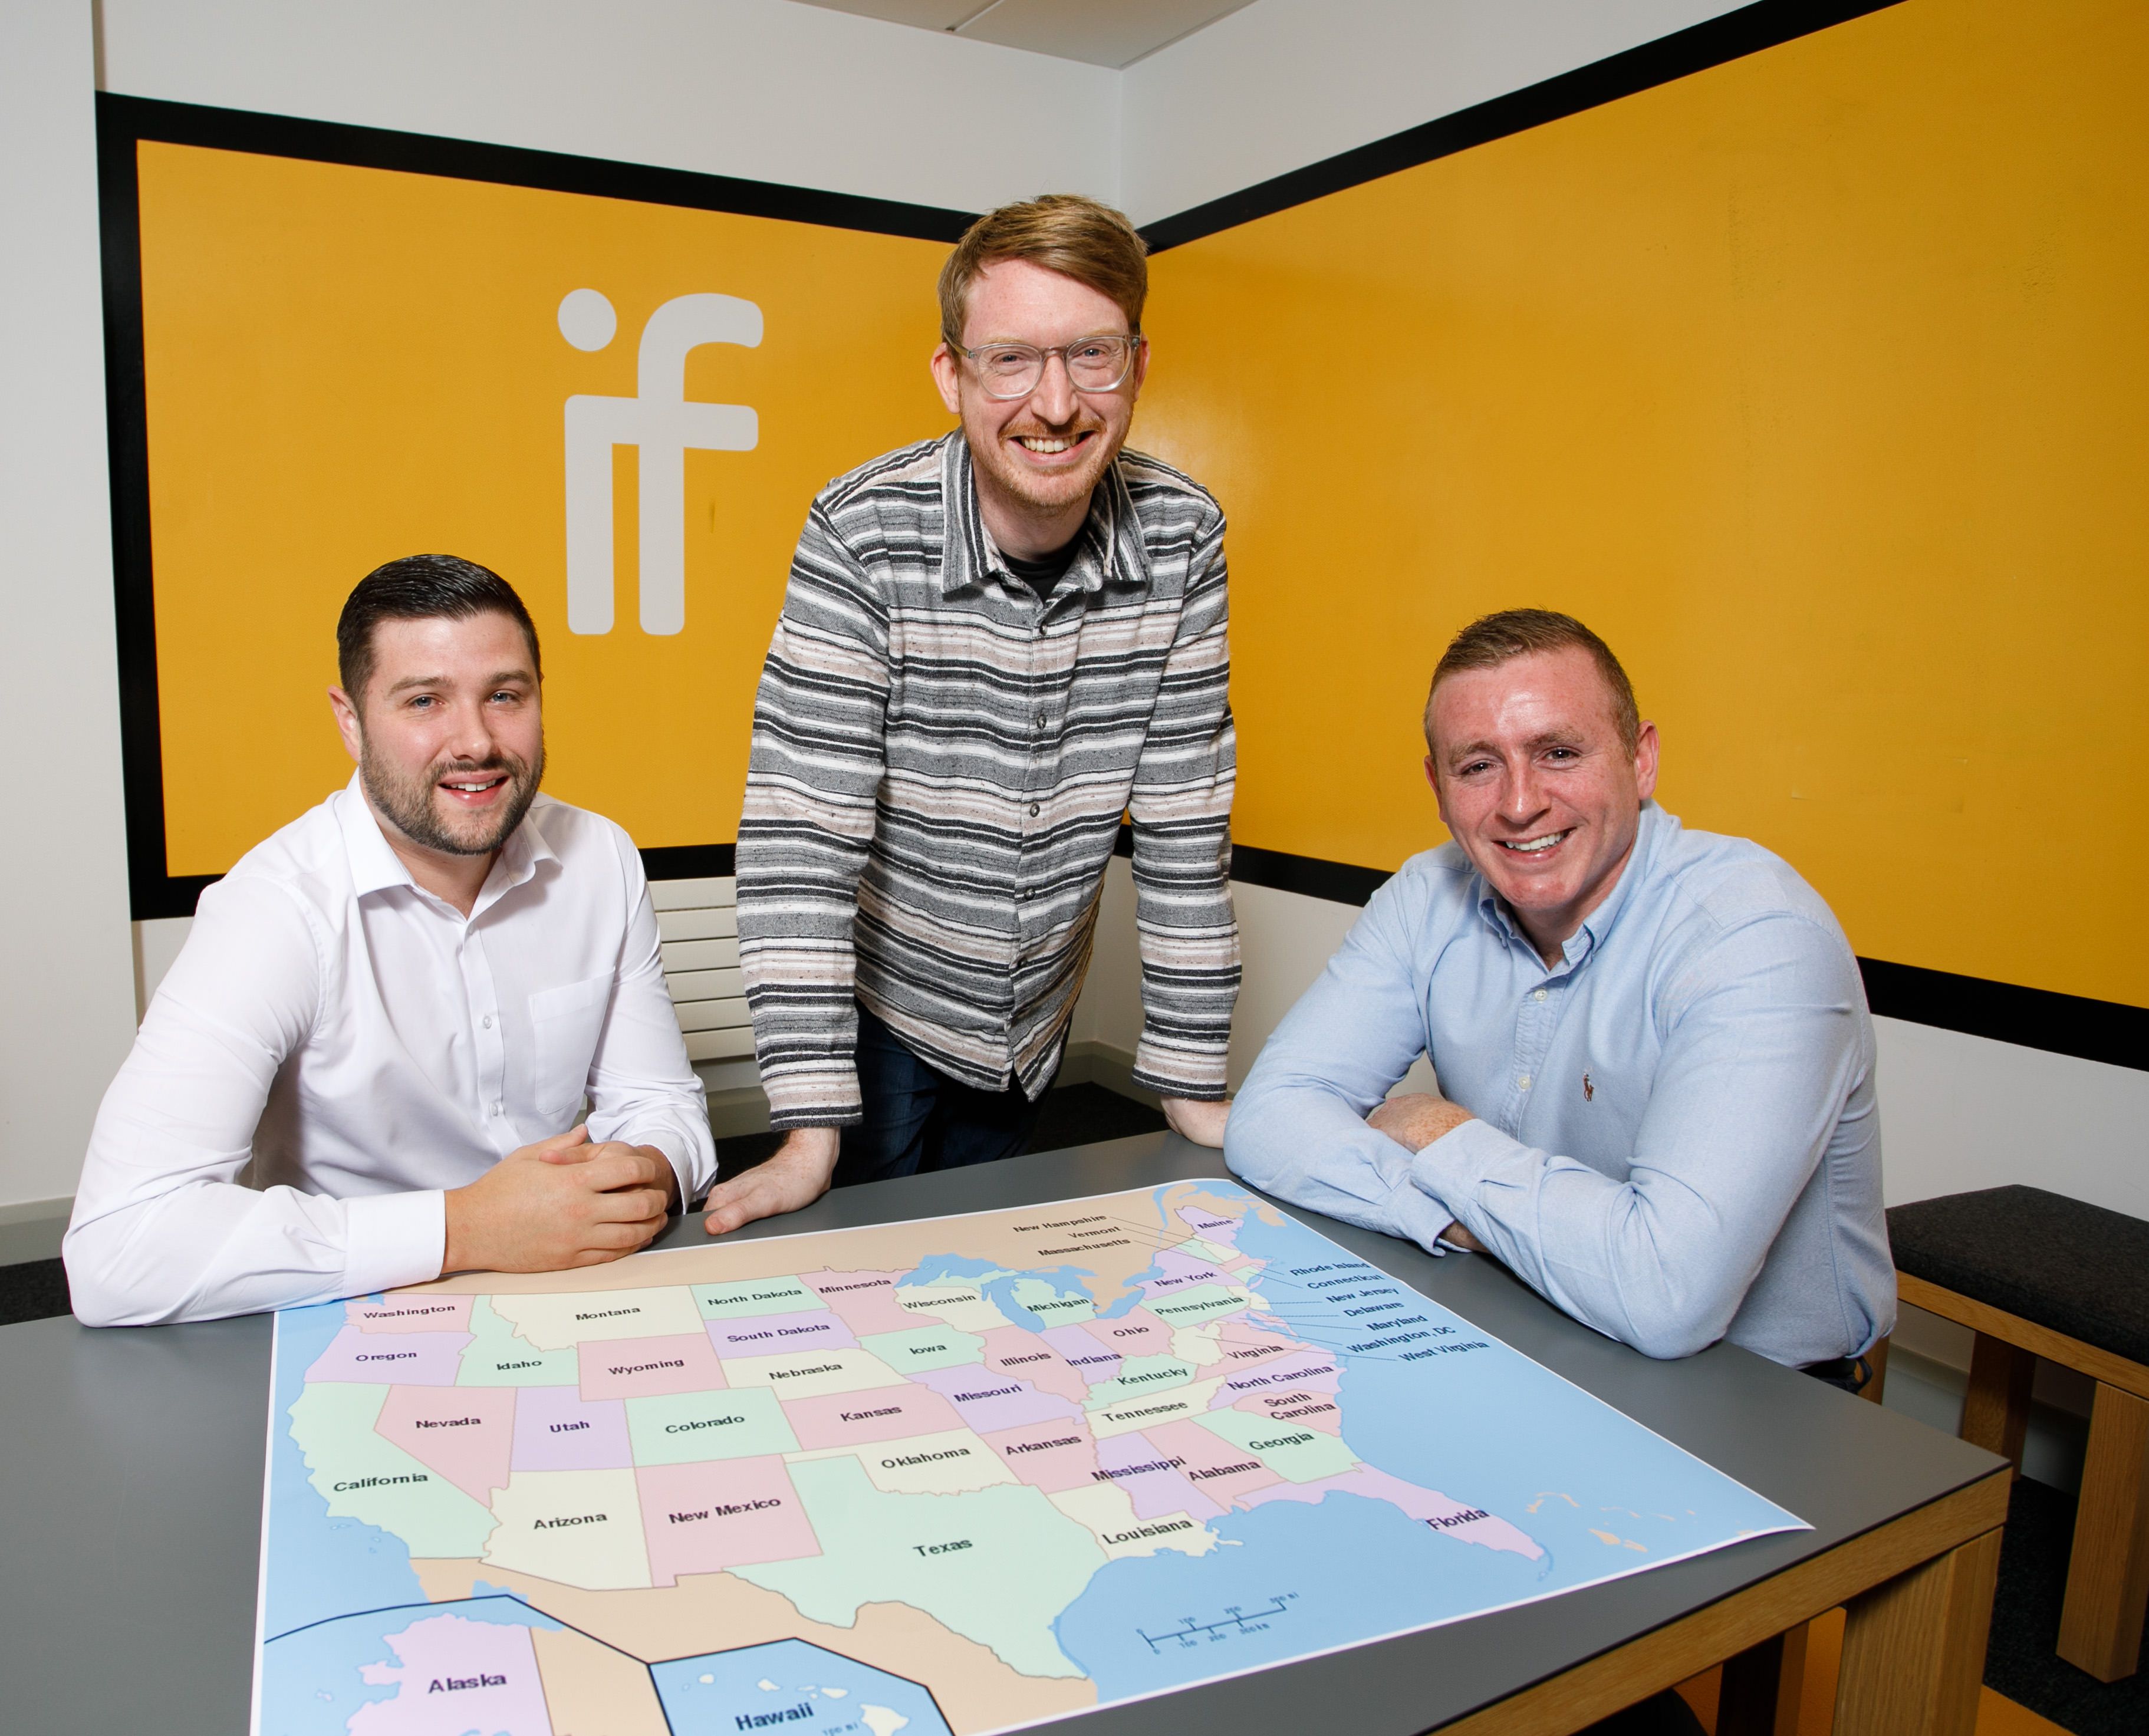 EXPANSION PLANS: Necto Directors Aaron Linden and Paddy McDade discuss their plans with Innovation Factory Centre Director Neil Allen